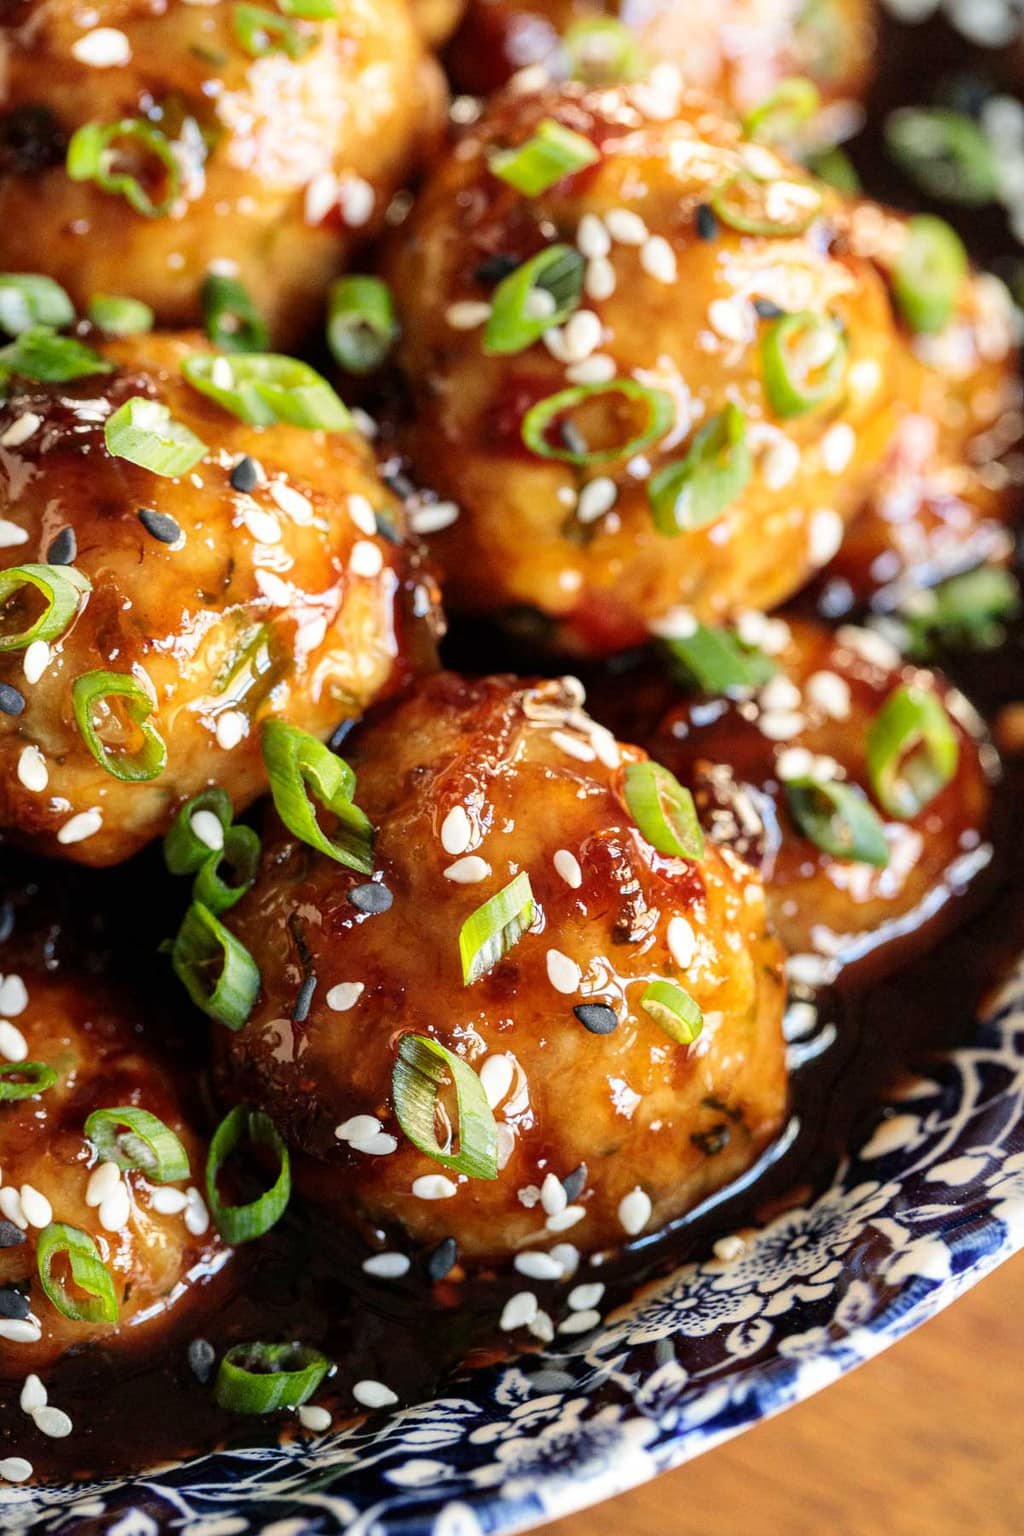 Extreme closeup of a bowl of Strawberry Balsamic Glazed Chicken Meatballs.